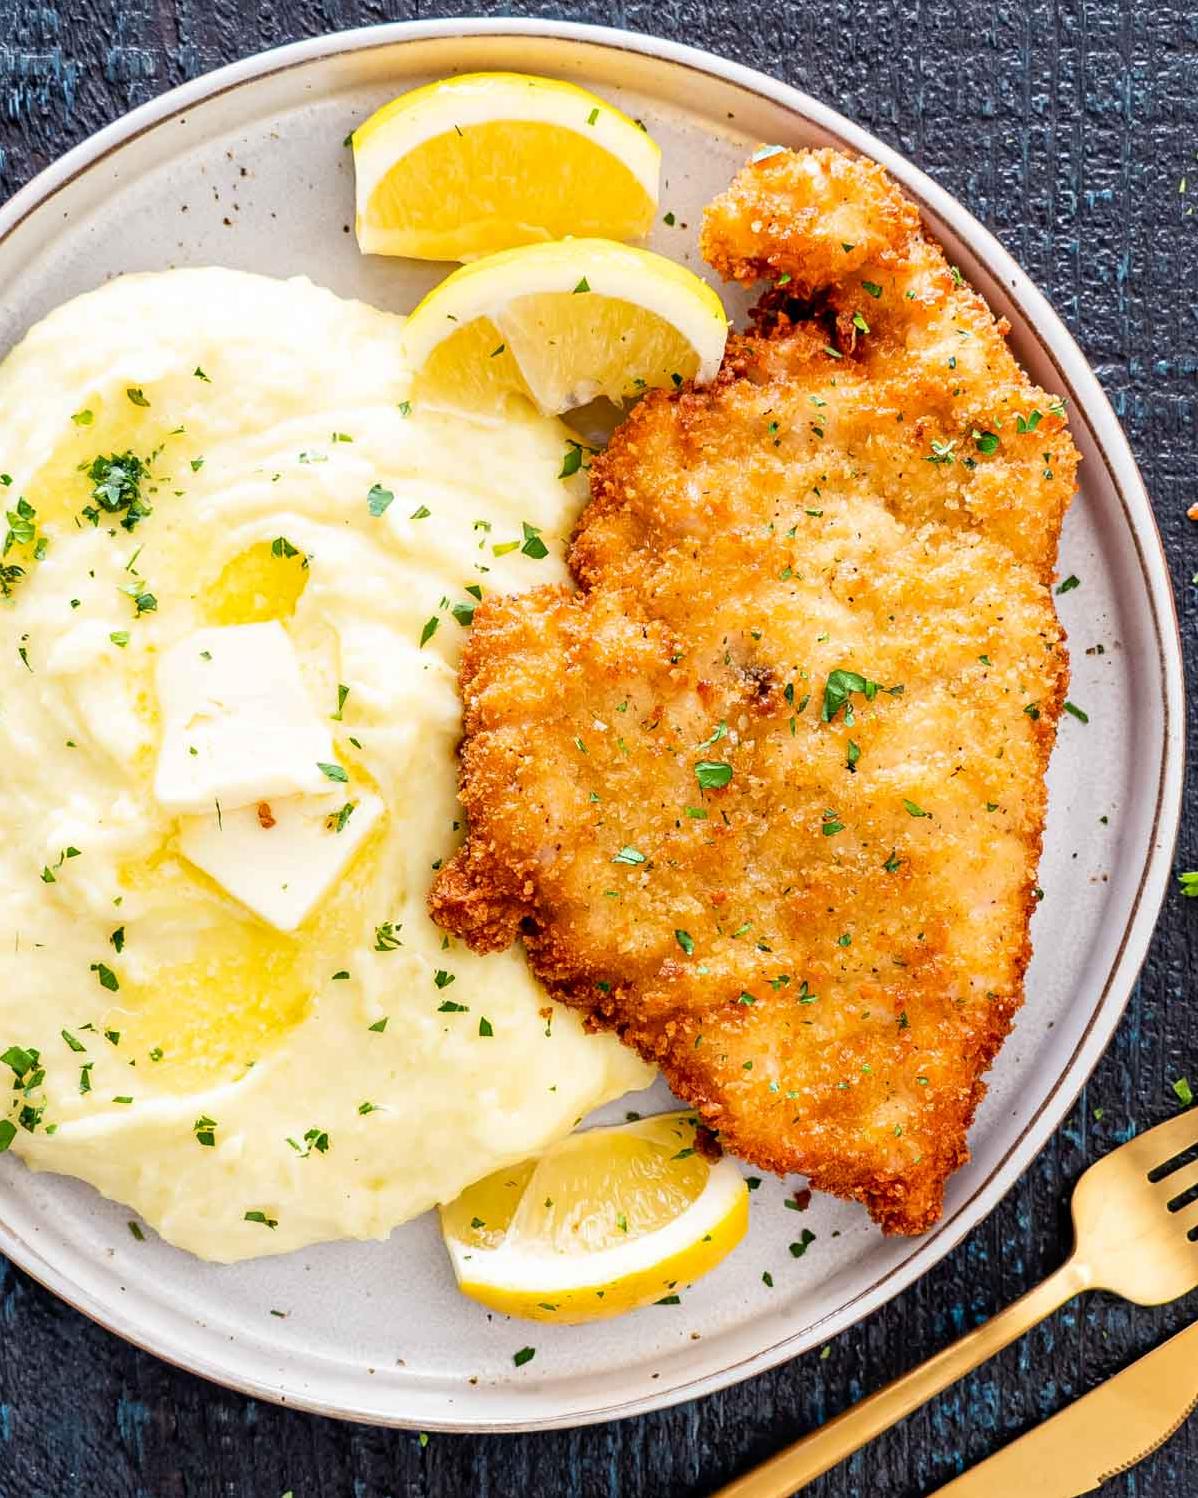  The perfect plate of chicken schnitzel for any occasion